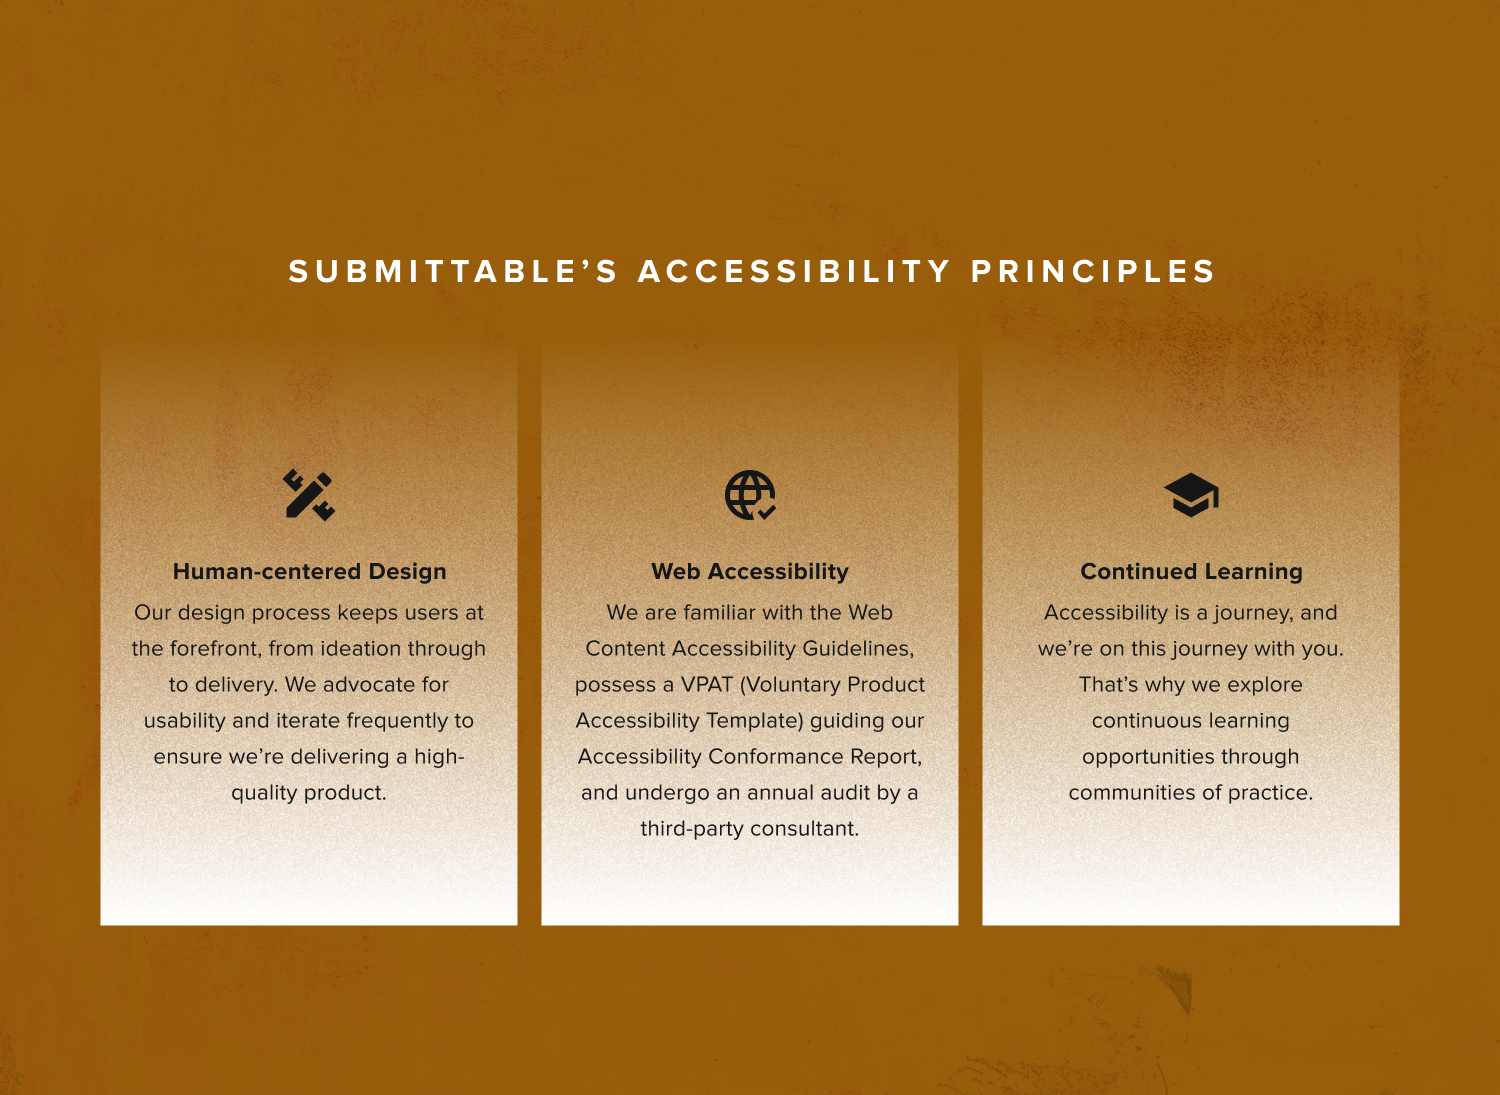 Feature image for the "Submittable’s accessibility principles " section